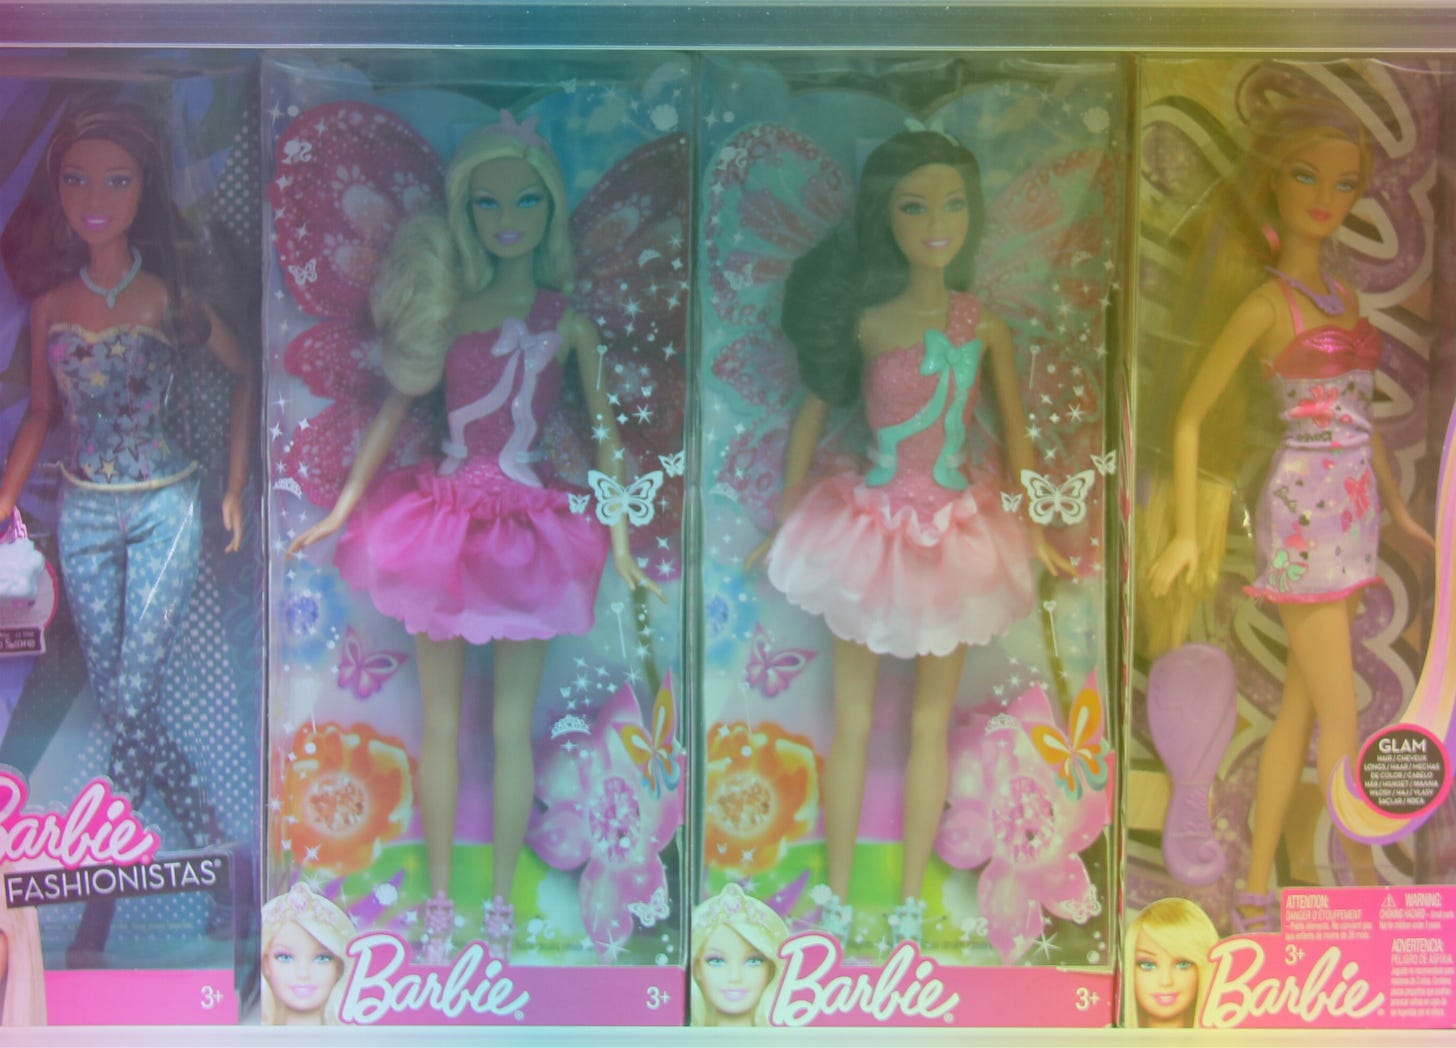 A rainbow-filtered photo of four different Barbies in their plastic boxes lined up next to each other on a toy store shelf